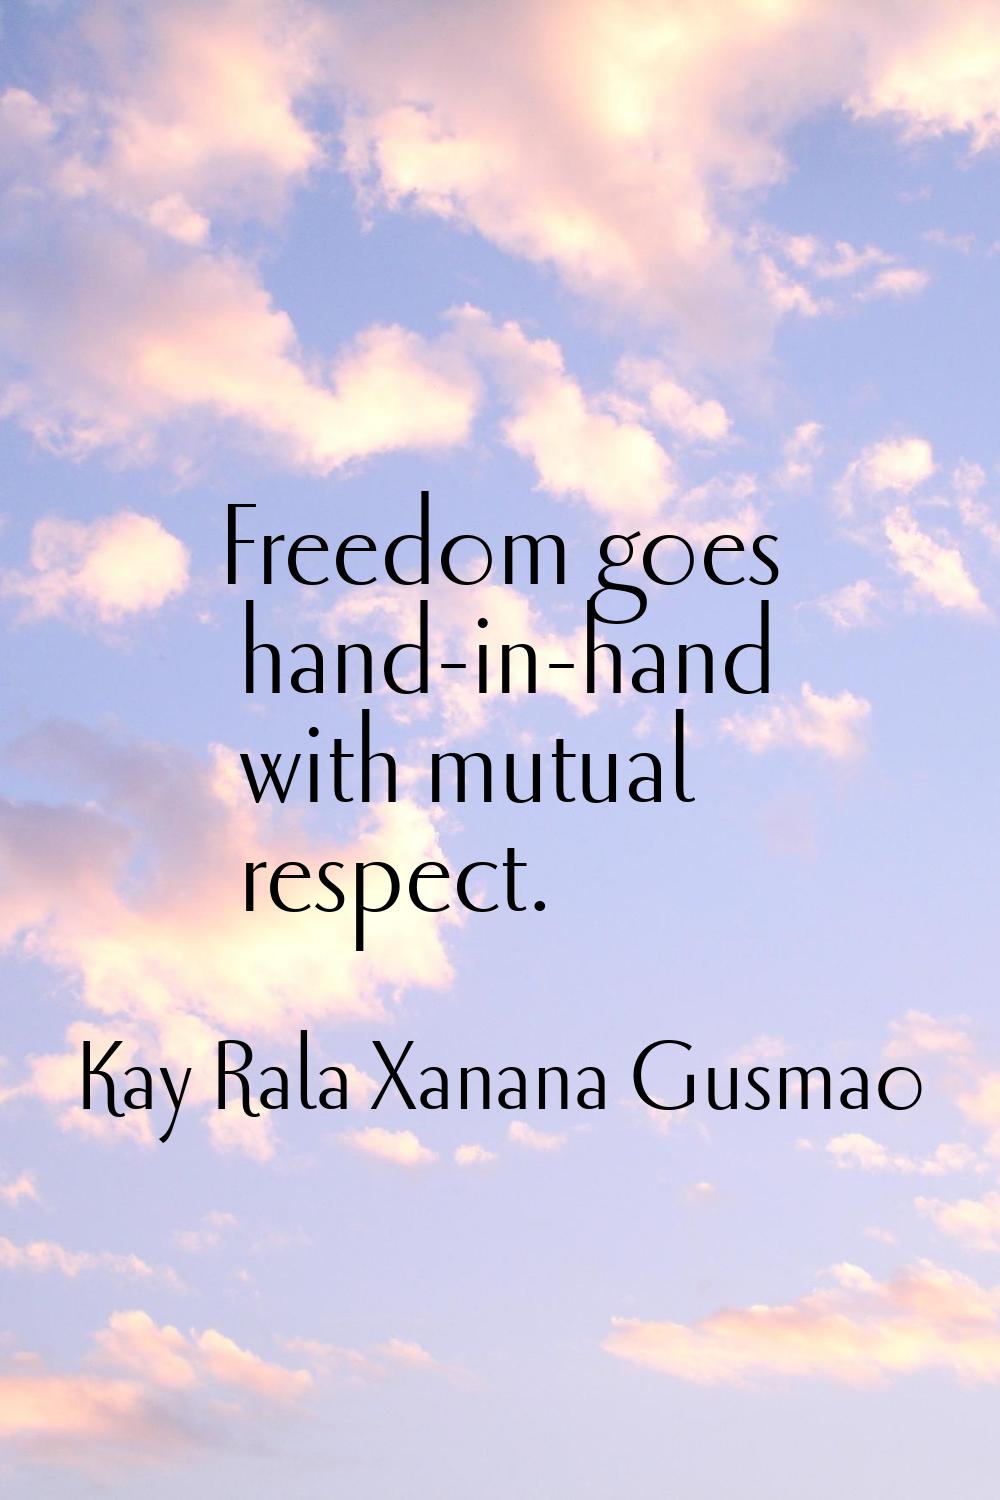 Freedom goes hand-in-hand with mutual respect.